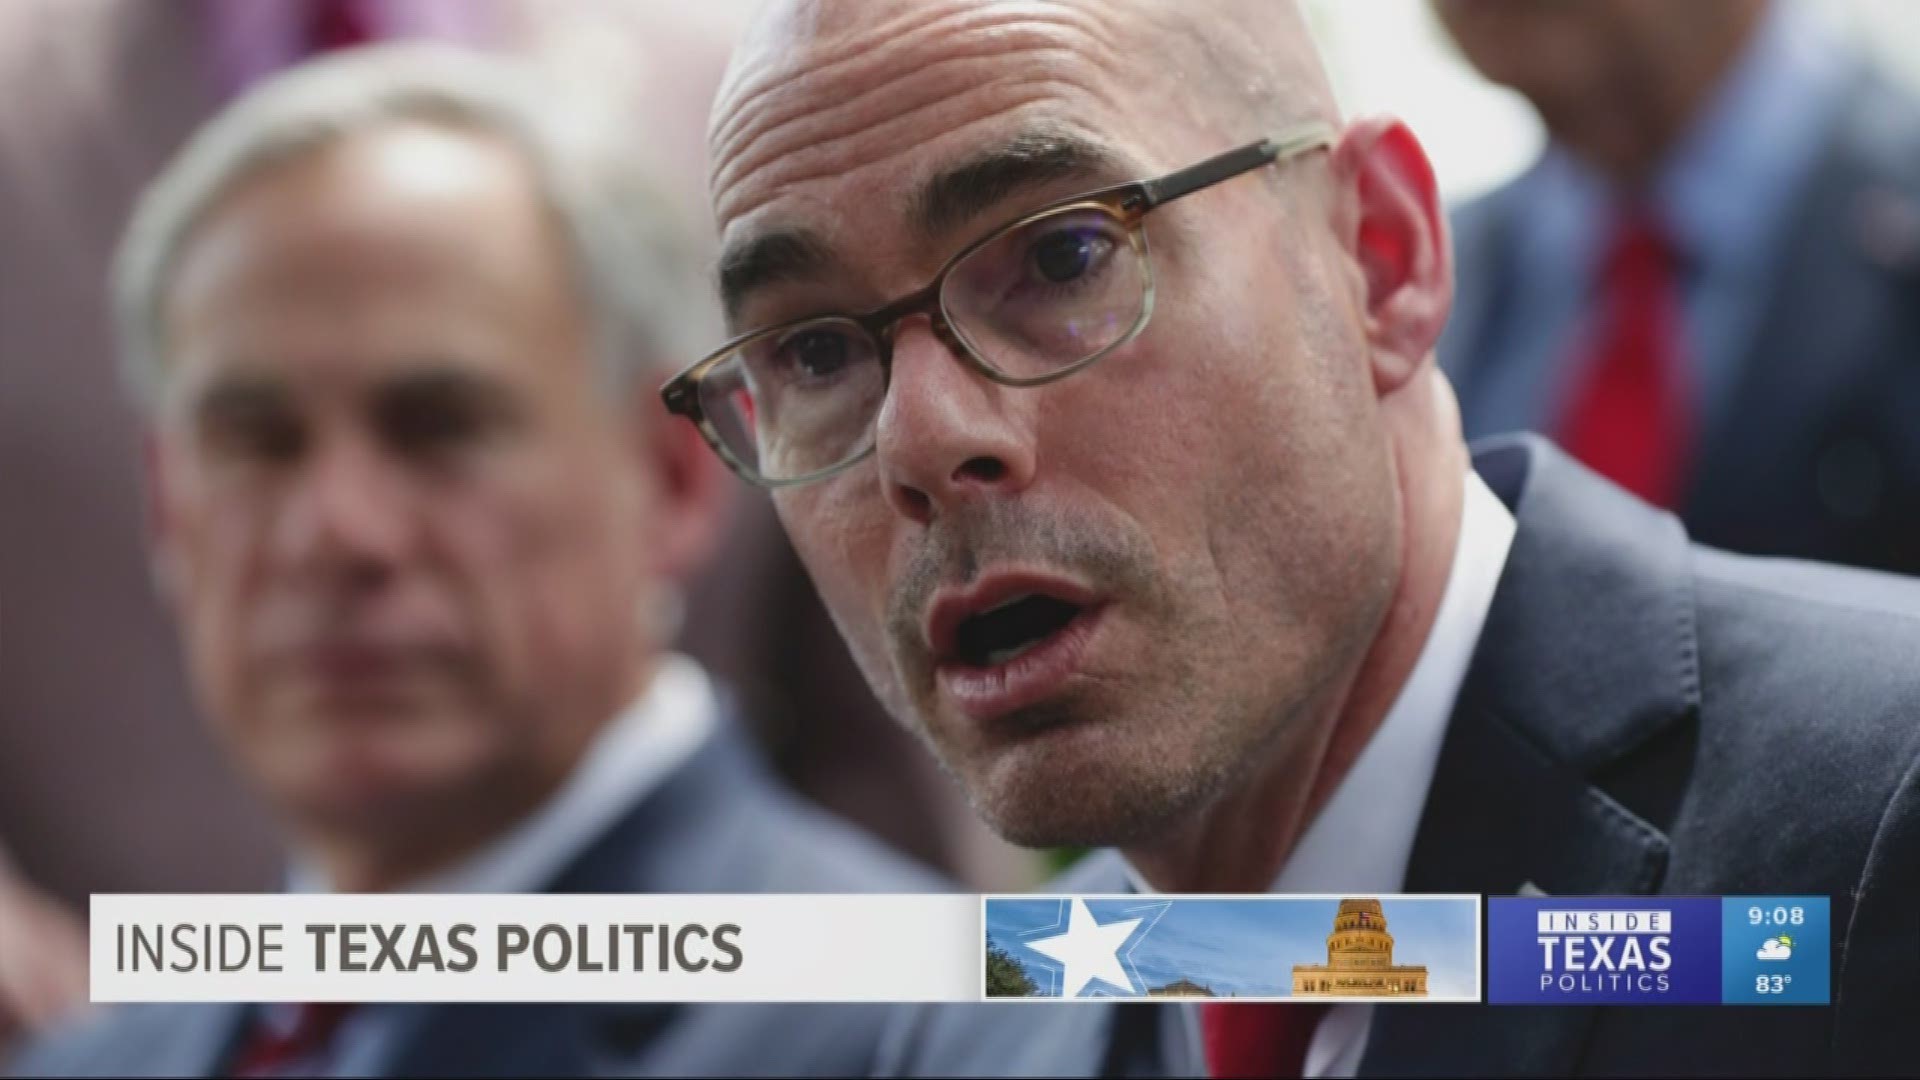 Ross Ramsey, the co-founder and executive editor of the Texas Tribune, joined host Jason Whitely to discuss what Rep. Burrows resignation means for Speaker Bonnen. Ross and Jason also talked about Democratic presidential candidate Julian Castro’s struggle to get on the stage for the third Democratic debate.